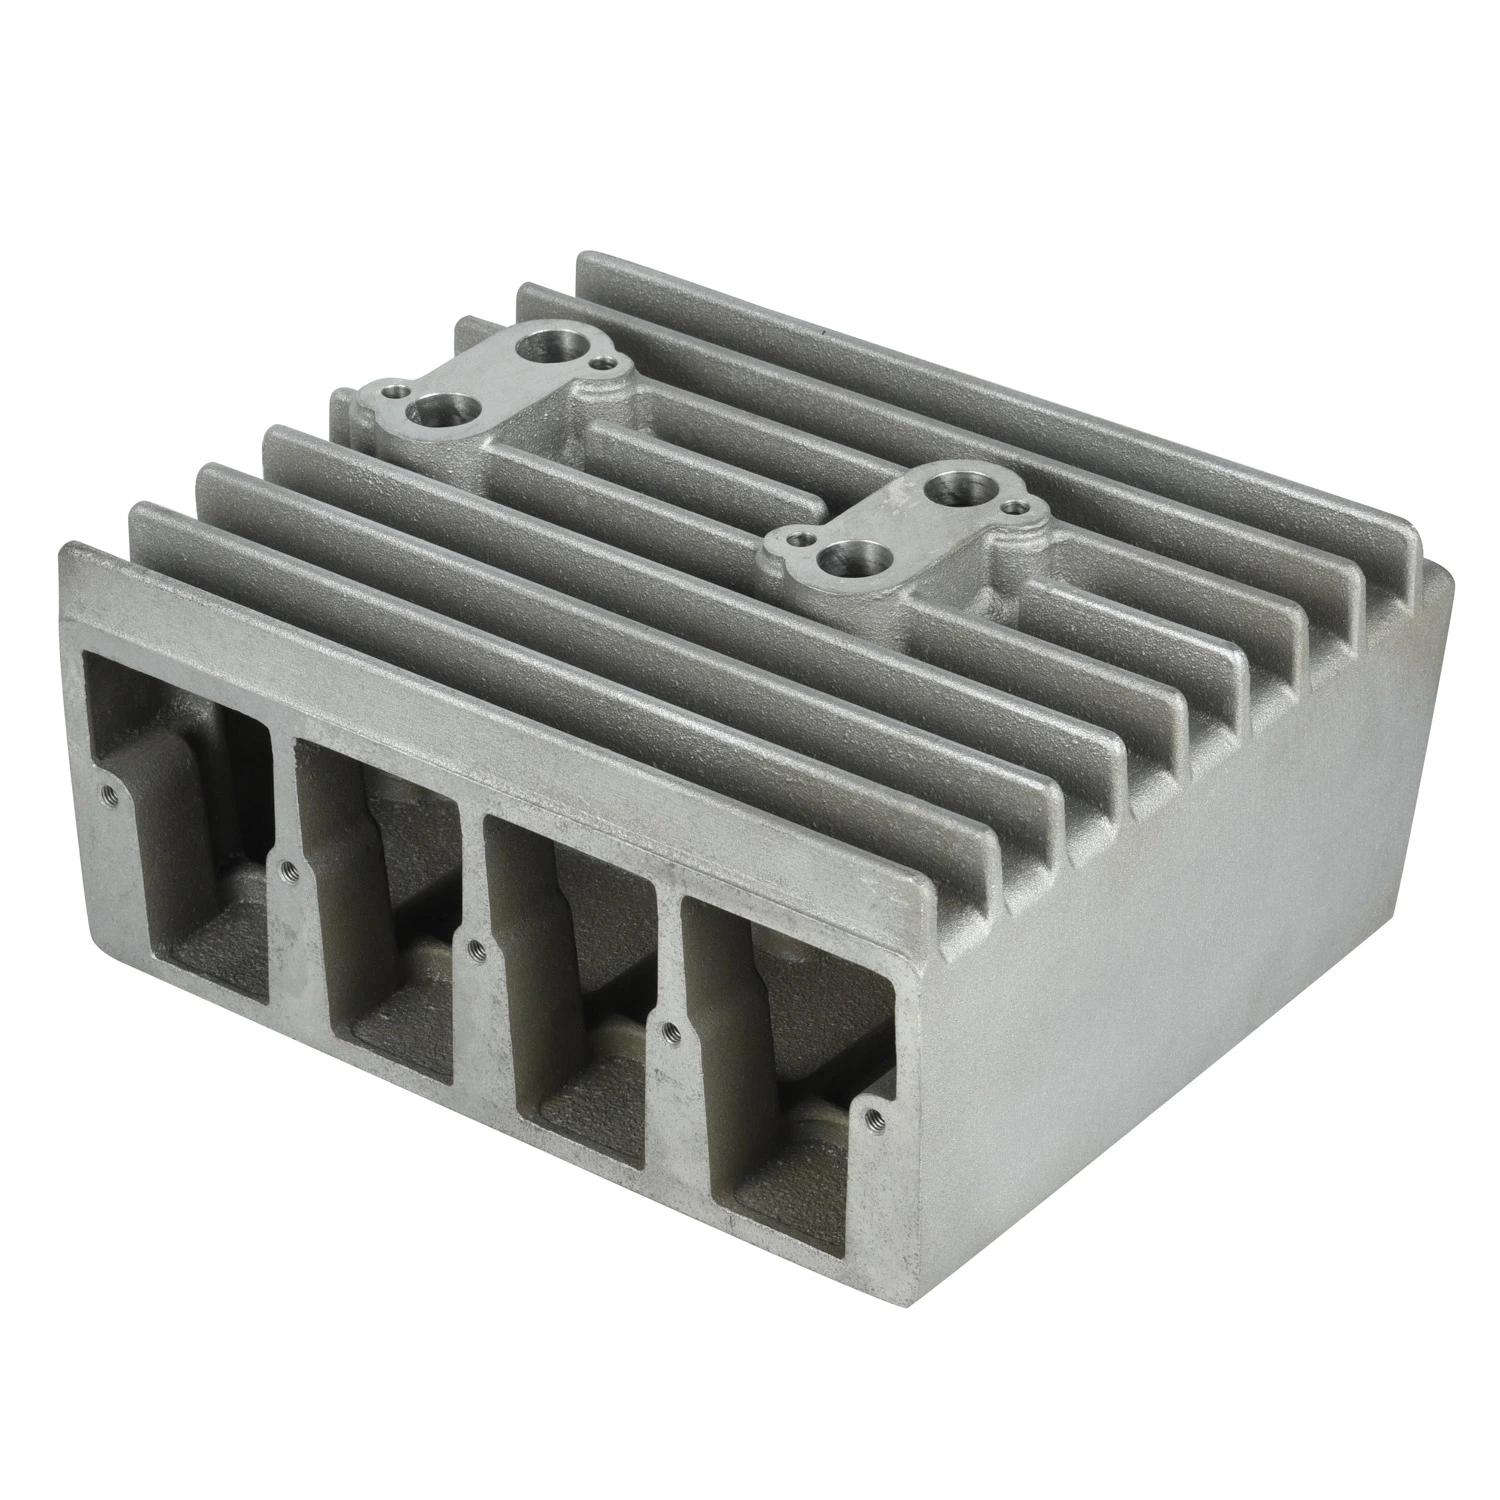 Aluminium Alloy A356 Sand Casting / Gravity Casting Die Casting and CNC Machining Cooling Fin OEM